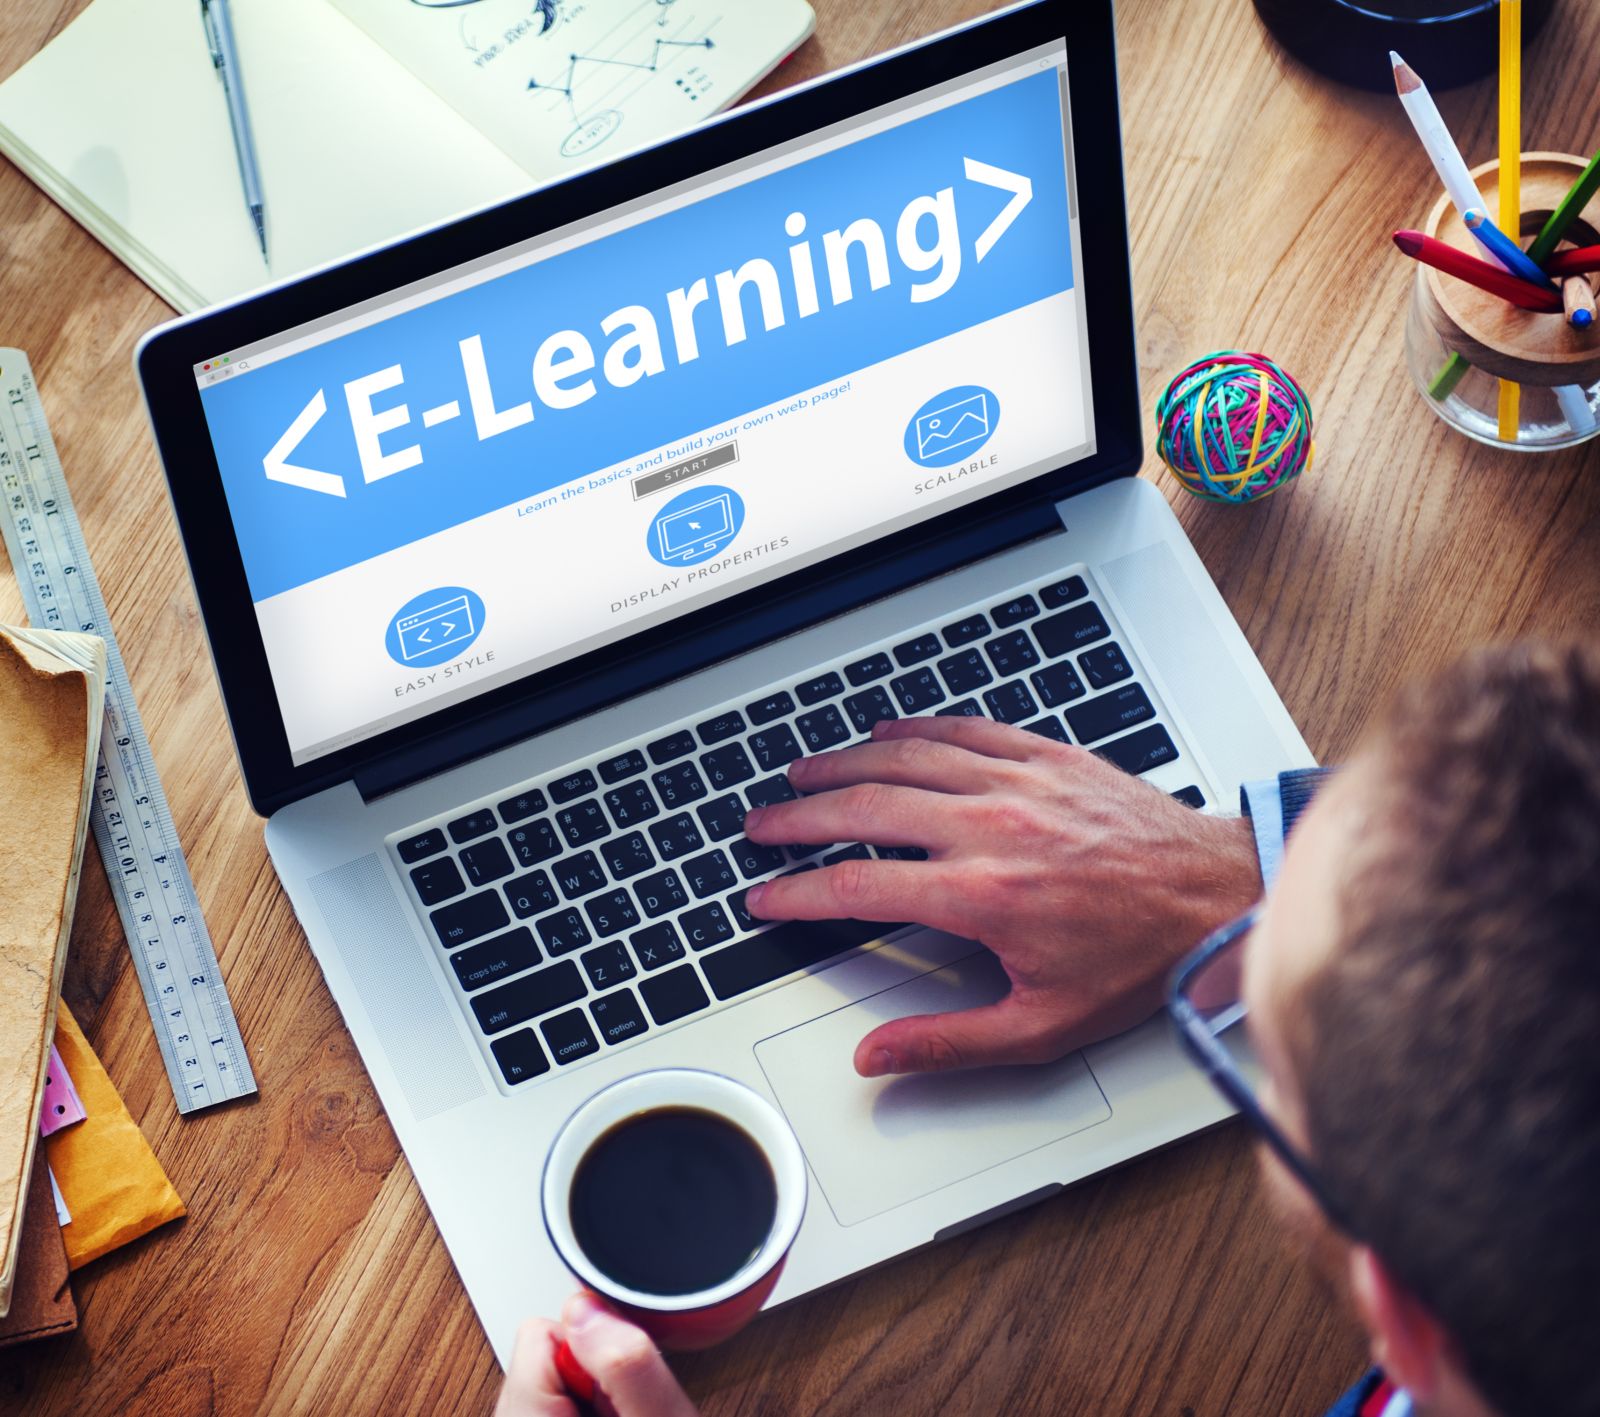 e-Learning Solutions